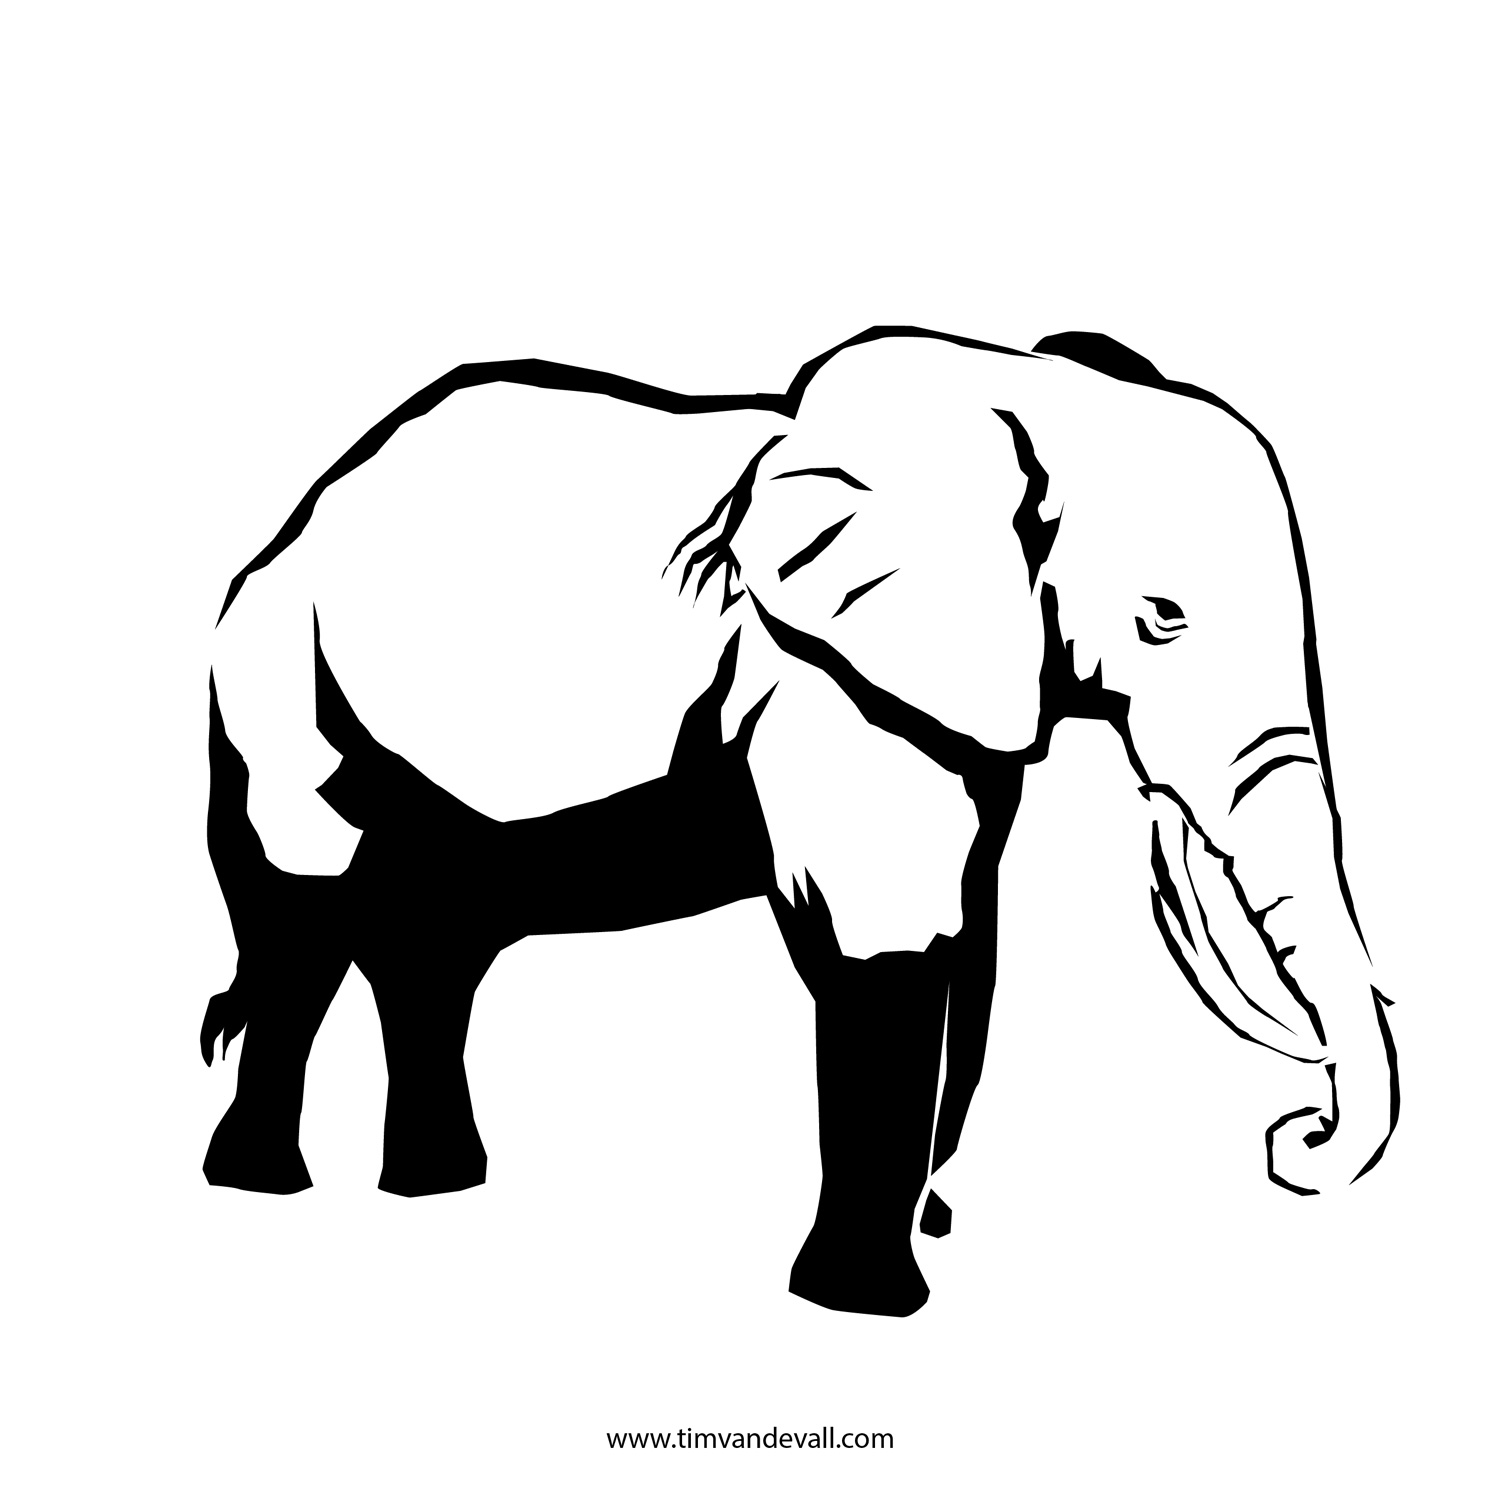 Elephant Outline Printable Search Results Calendar 2015